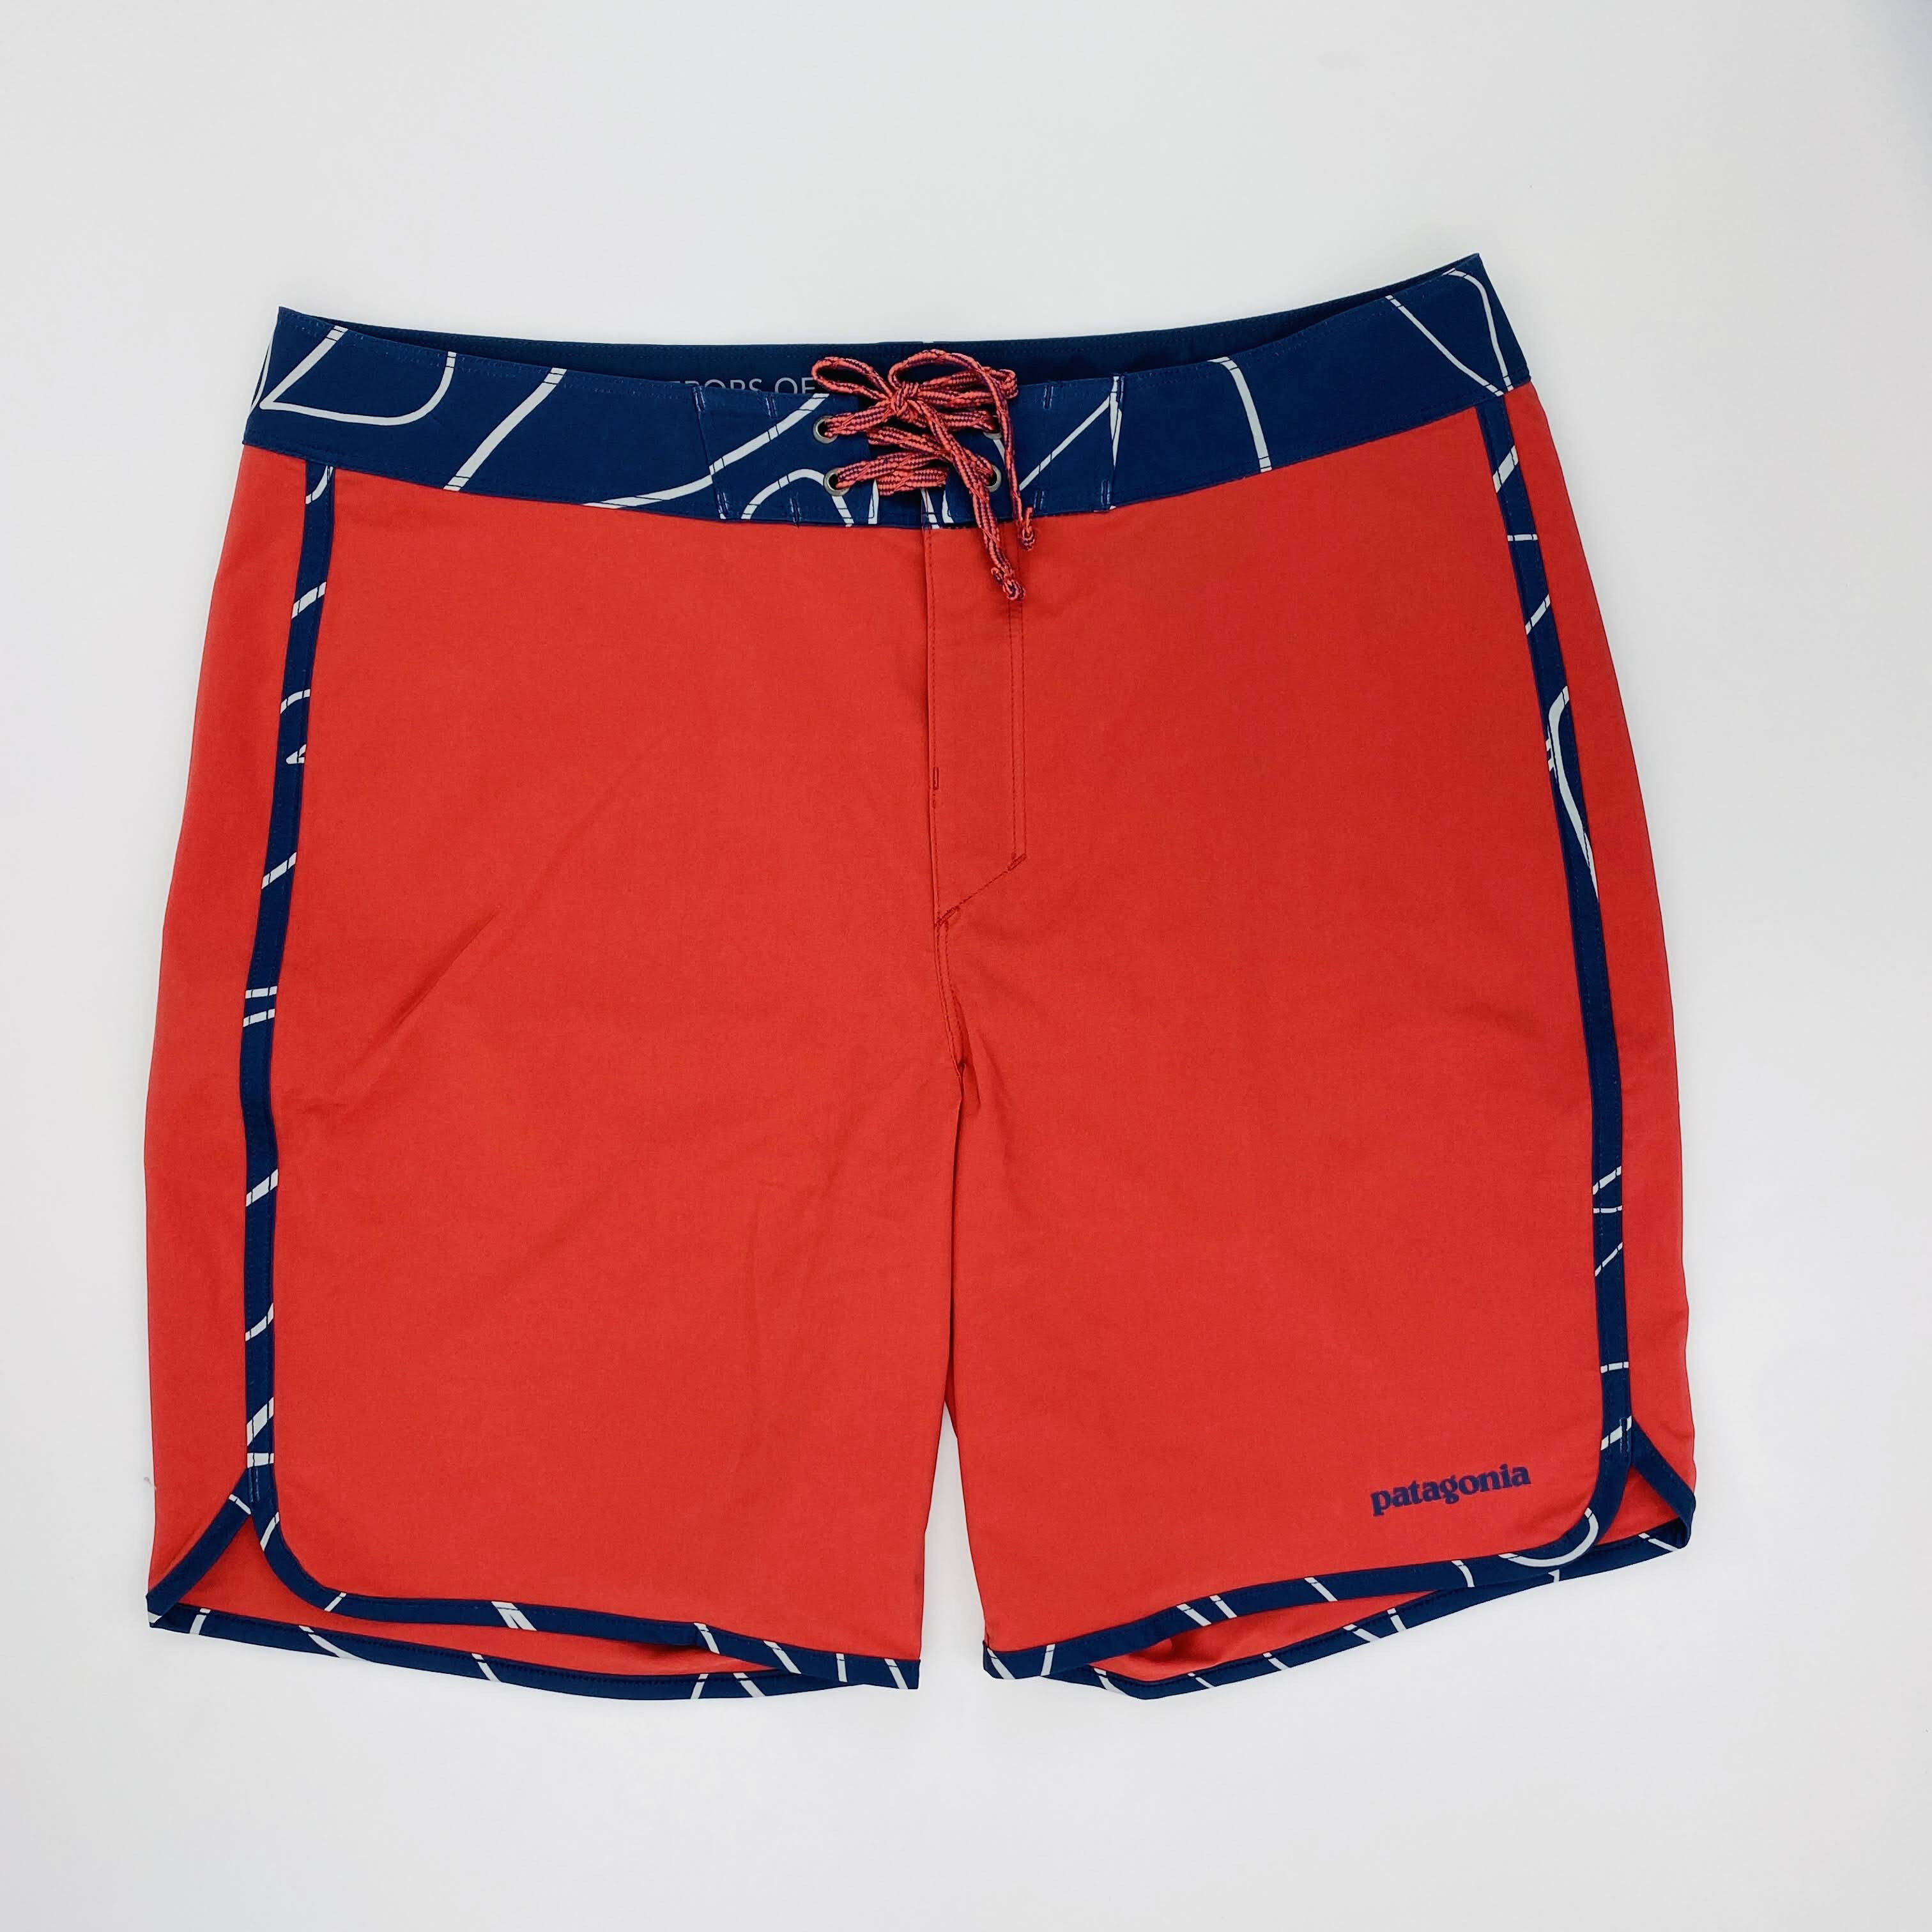 Patagonia M's Hydropeak Scallop Boardshorts - 18 in. - Second Hand